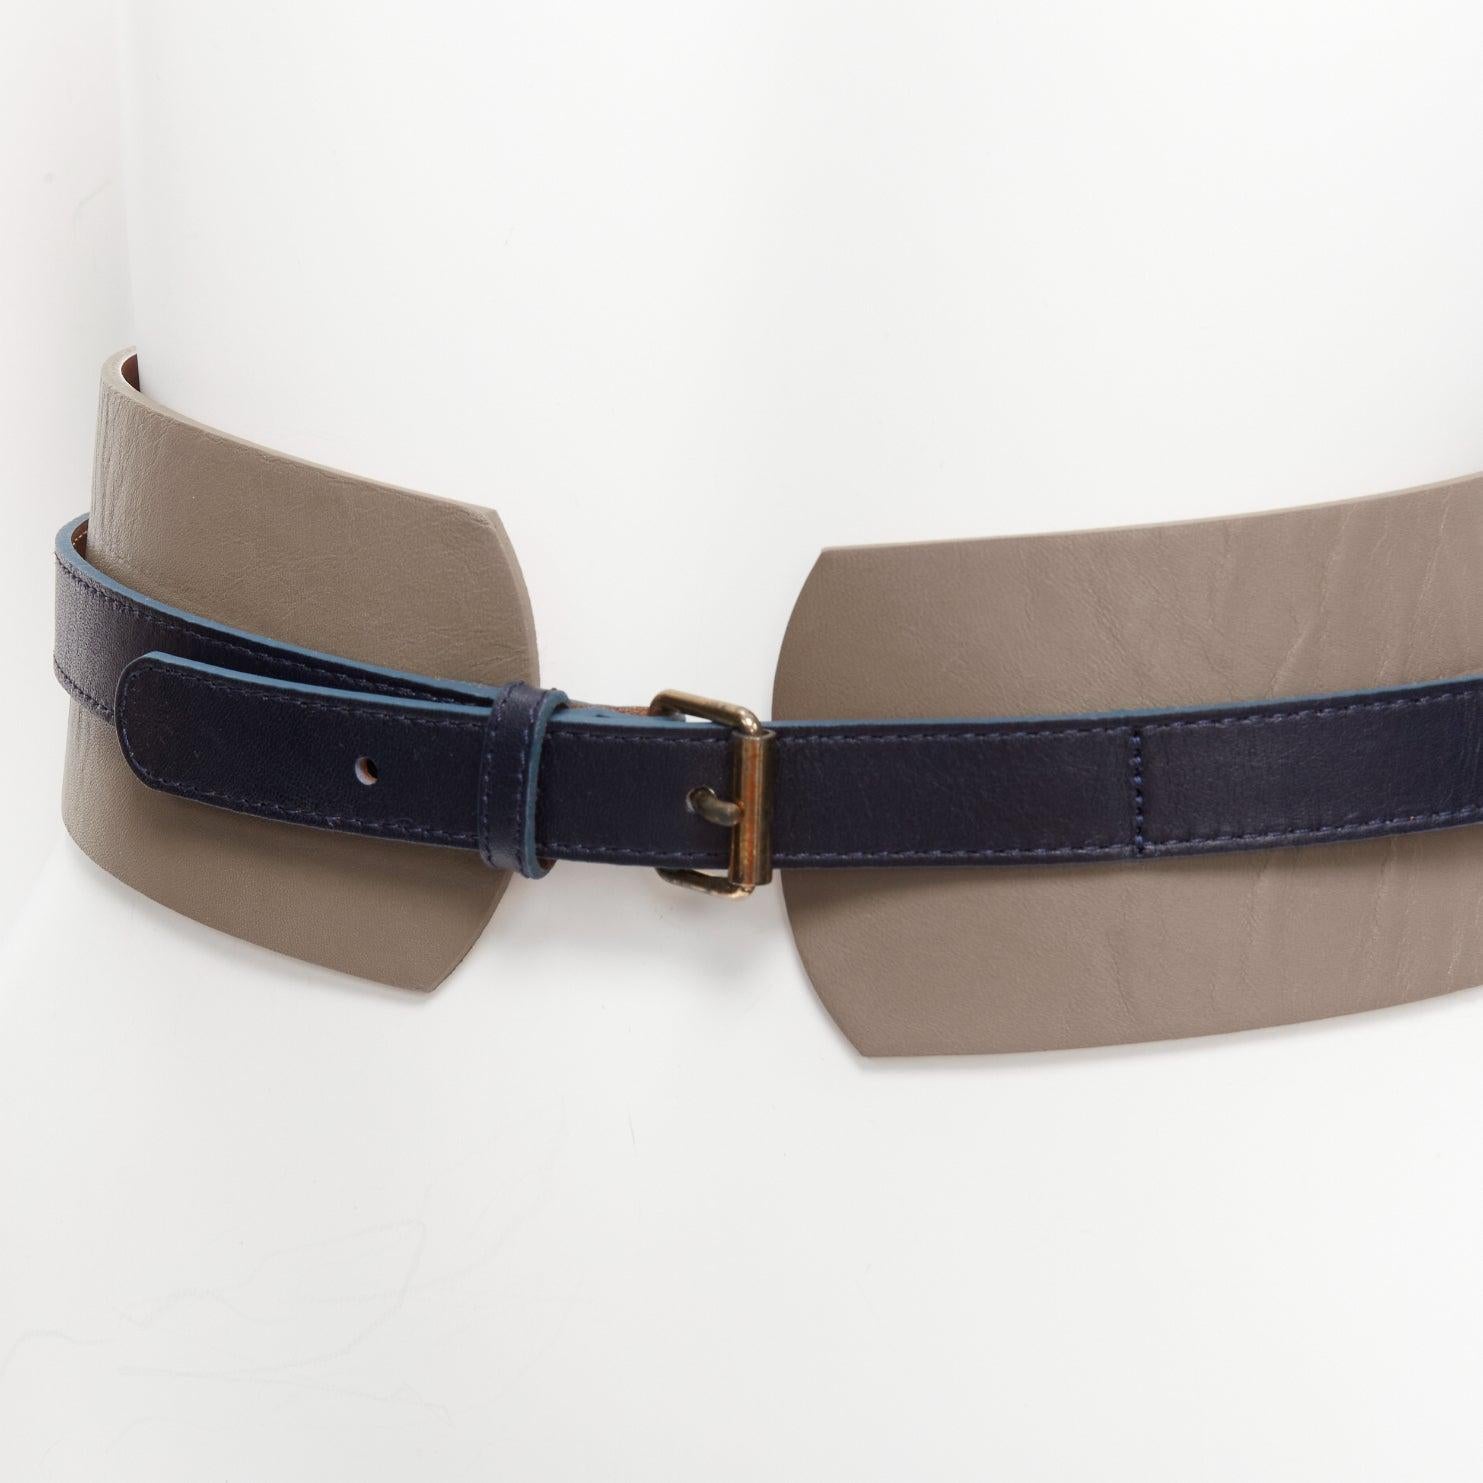 MAISON BOINET brown navy double cowhide leather gold buckle waist belt 70cm
Reference: SNKO/A00361
Brand: Maison Boinet
Material: Leather
Color: Brown, Navy
Pattern: Solid
Closure: Buckle
Lining: Brown Leather
Extra Details: Brown leather with navy